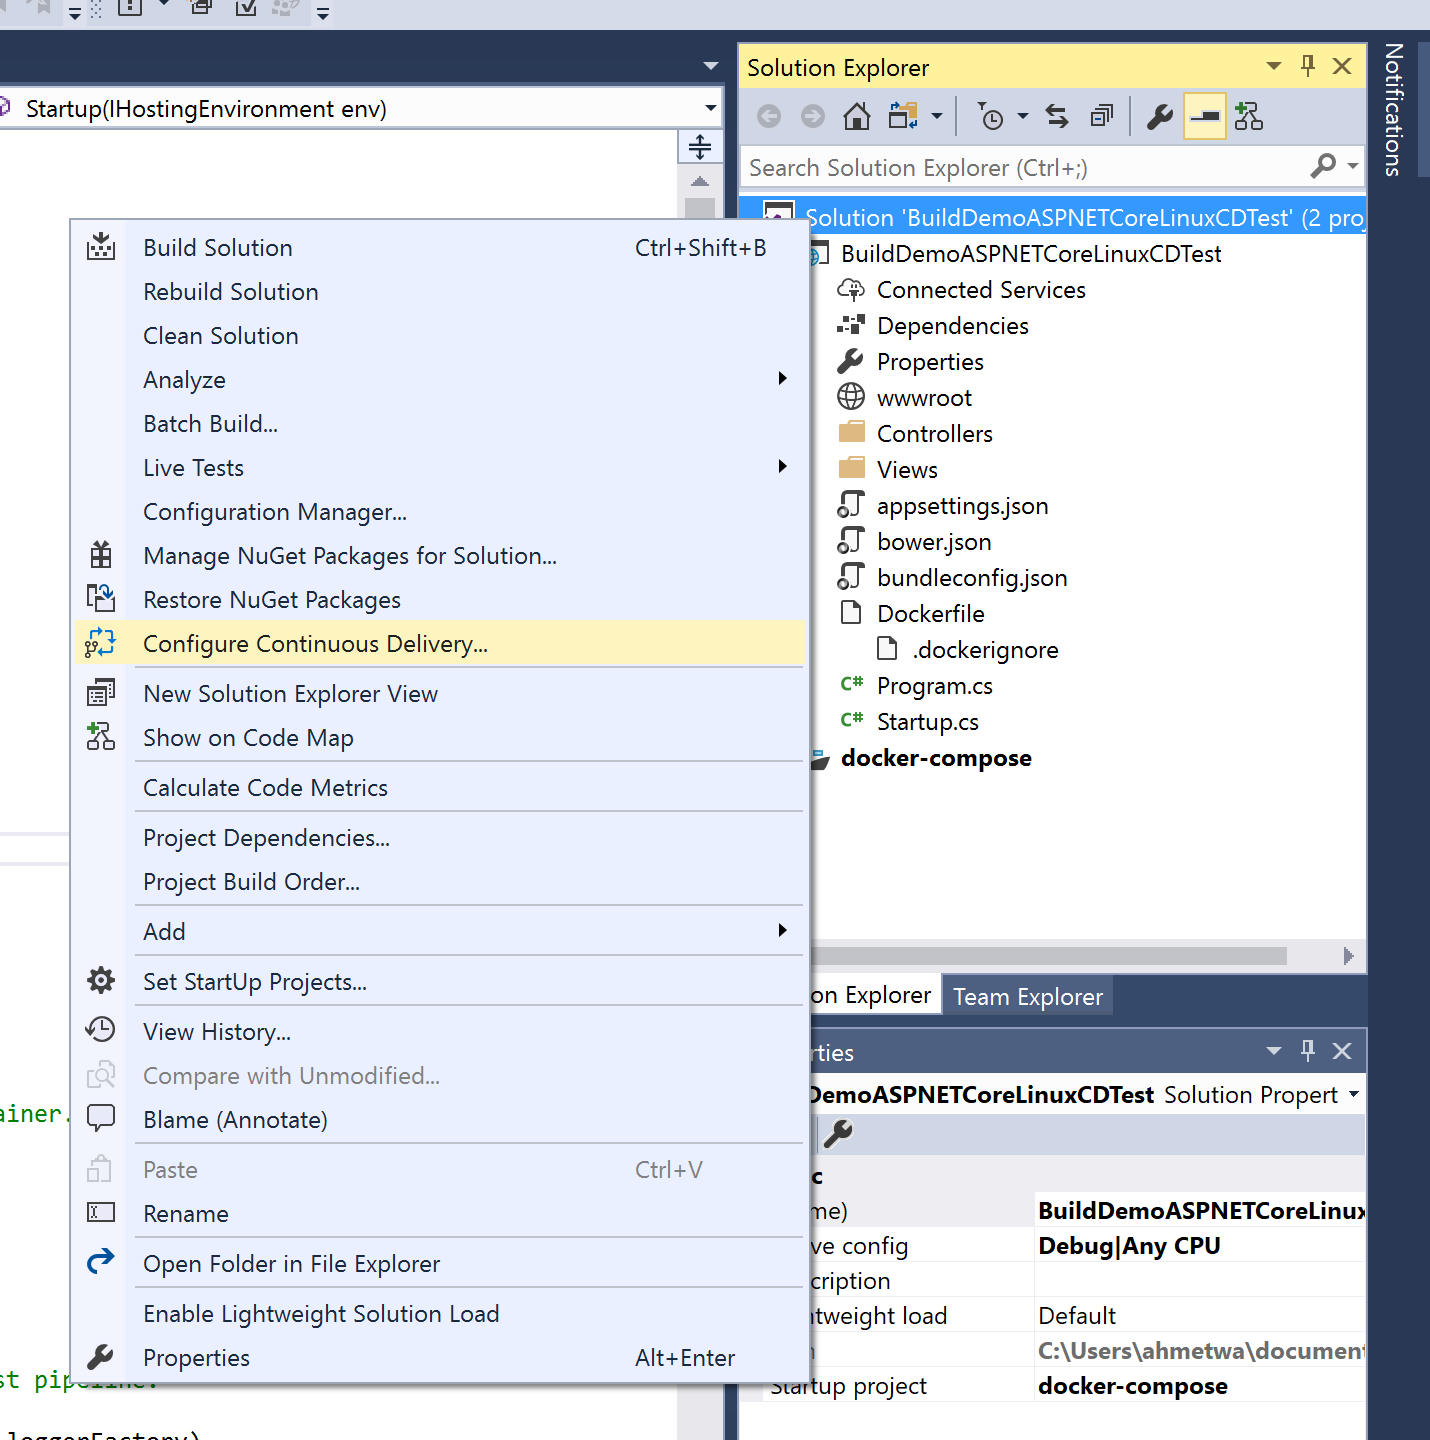 Configure Continuous Delivery for solutions under TFVC source control on Visual Studio Team Services